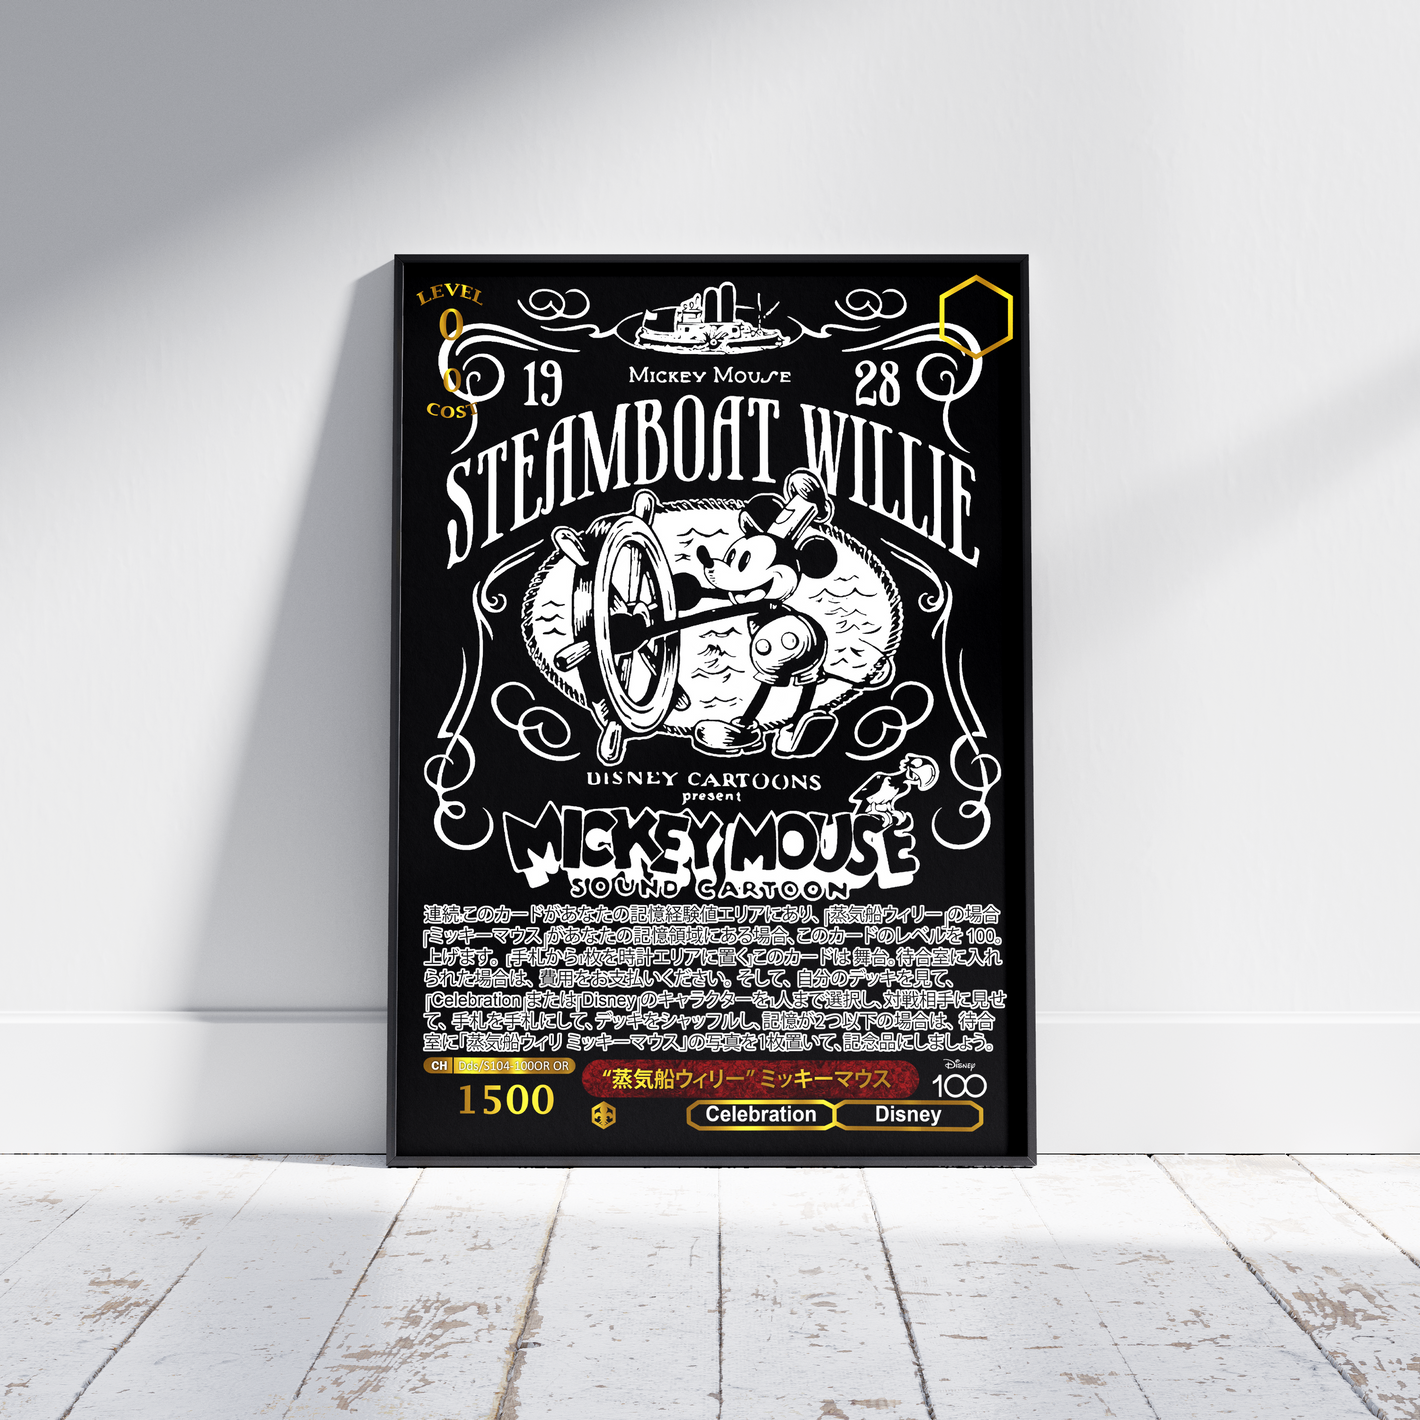 Disney 100, Steamboat willie, Original, Disney 100 seamboat willie poster, Disney, Mickey mouse